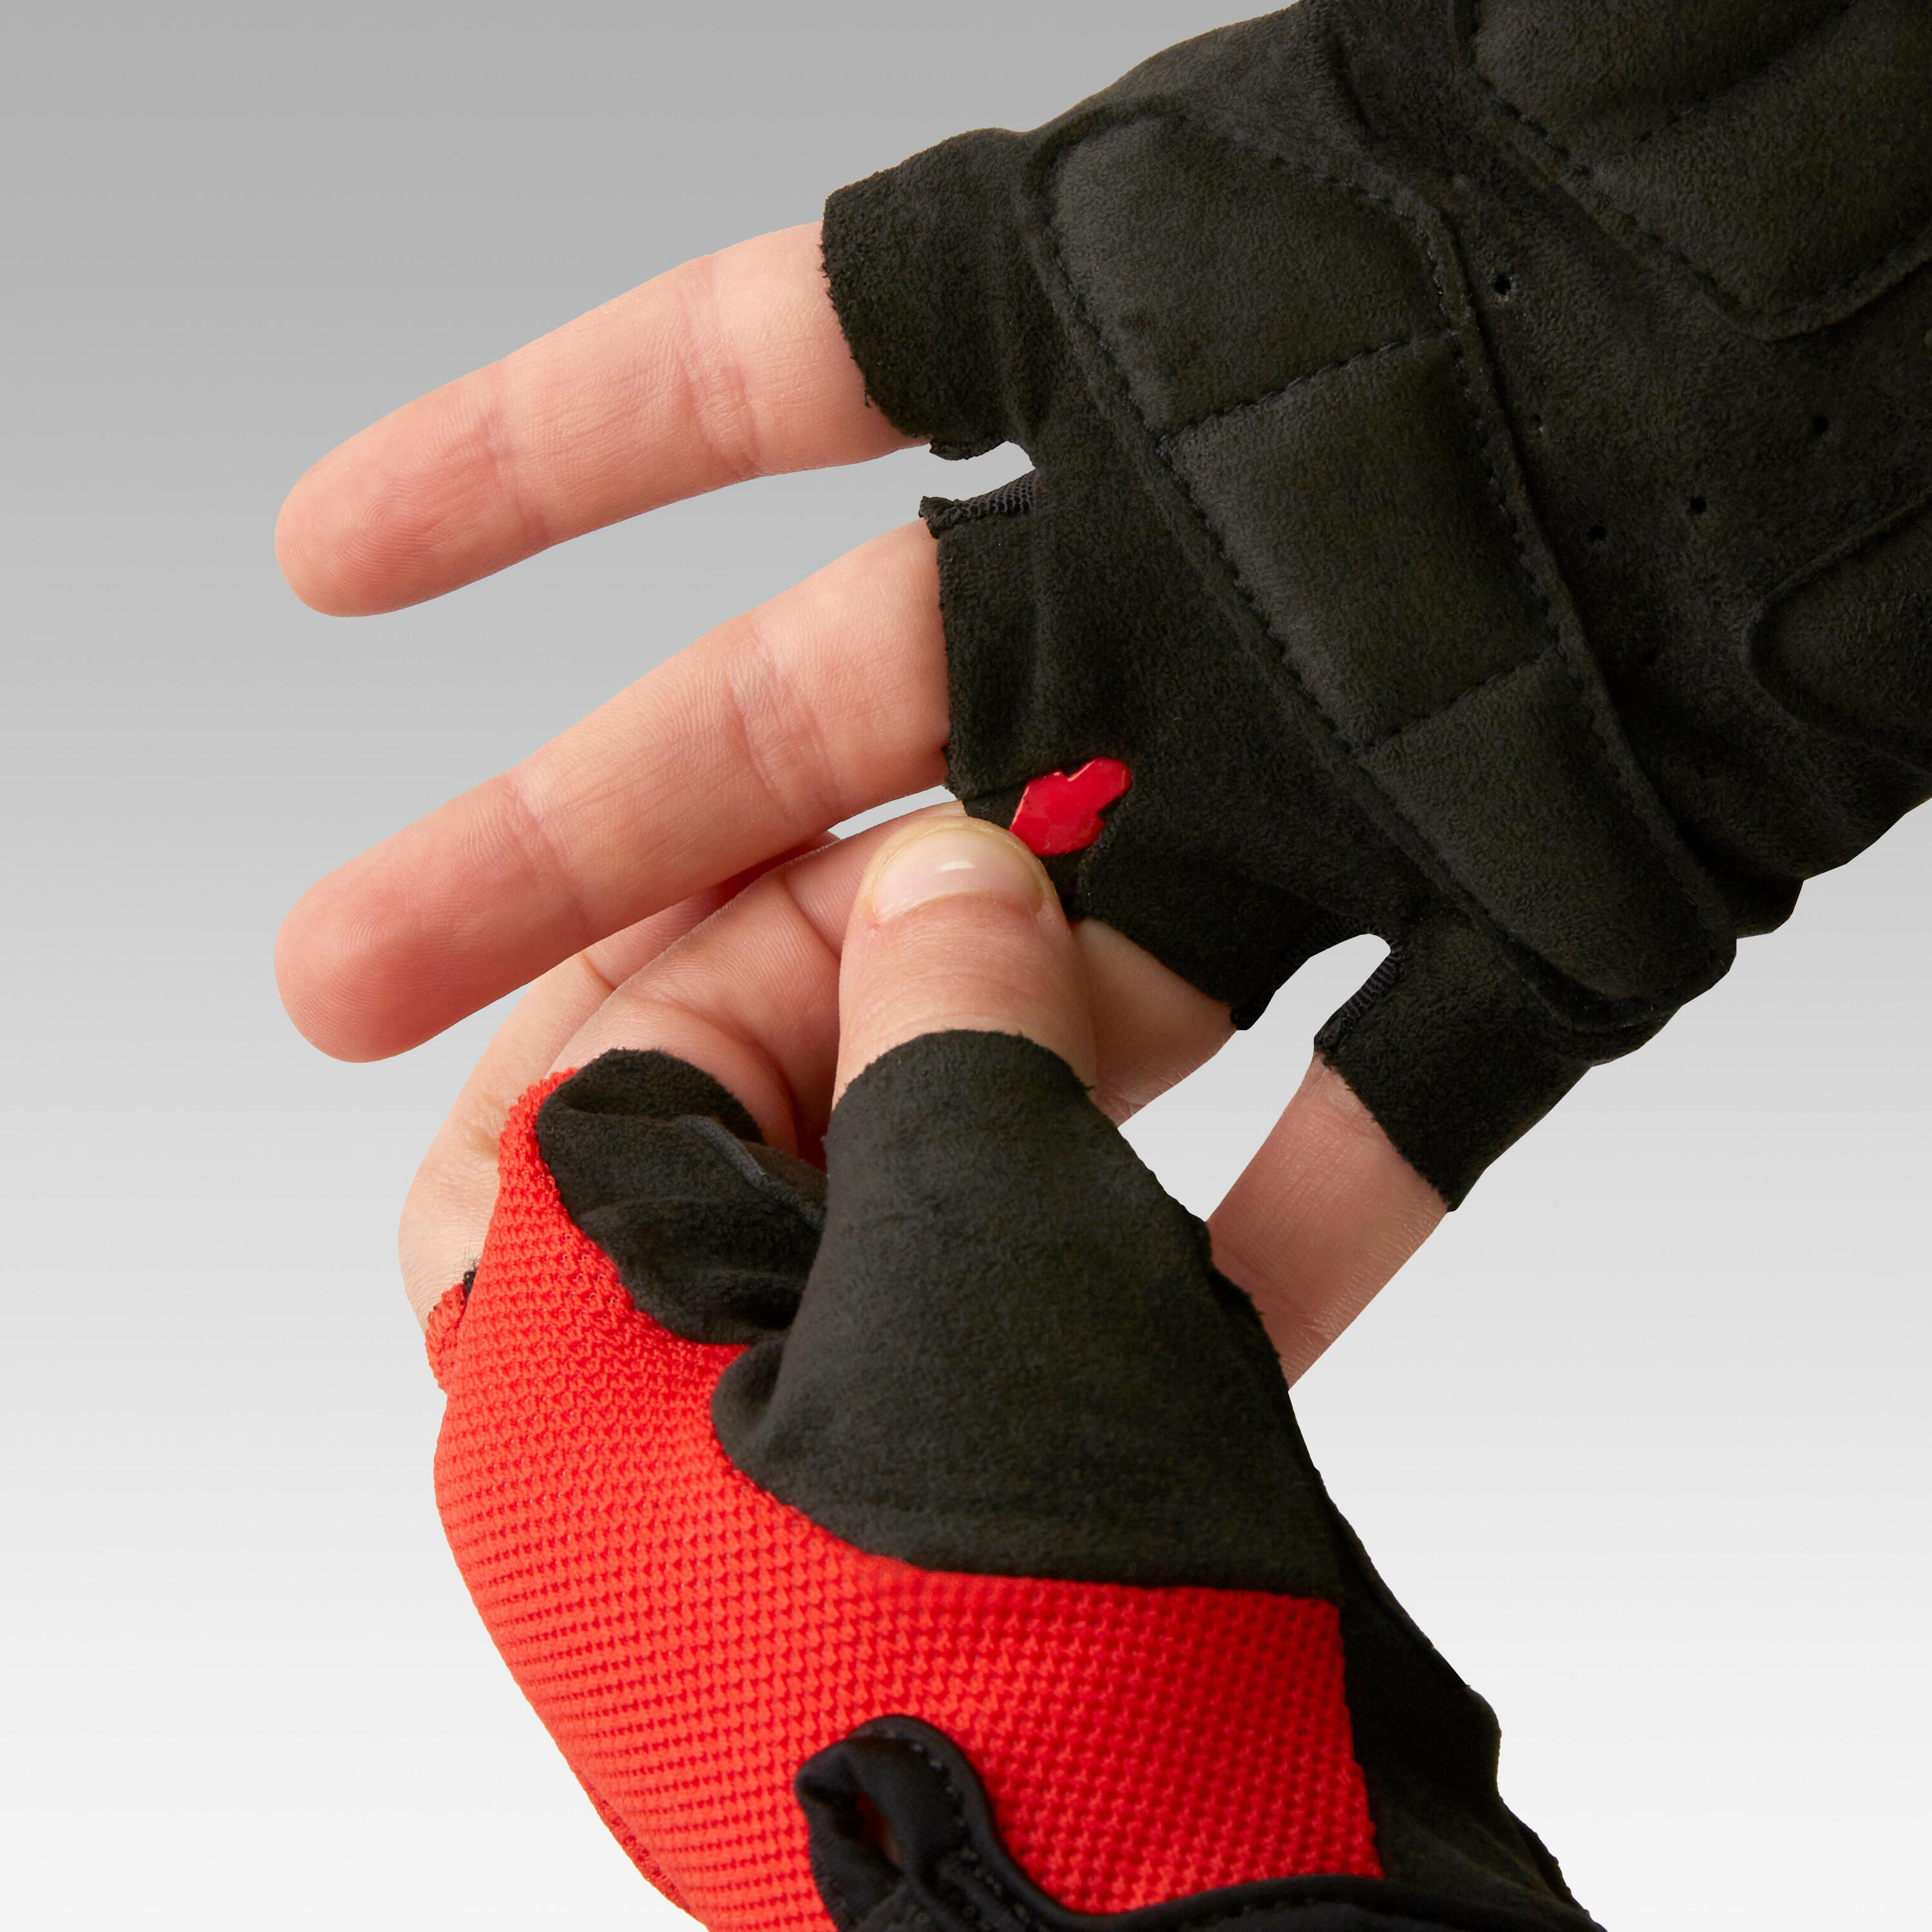 500 Kids' Fingerless Cycling Gloves 8-12 - Red 5/5